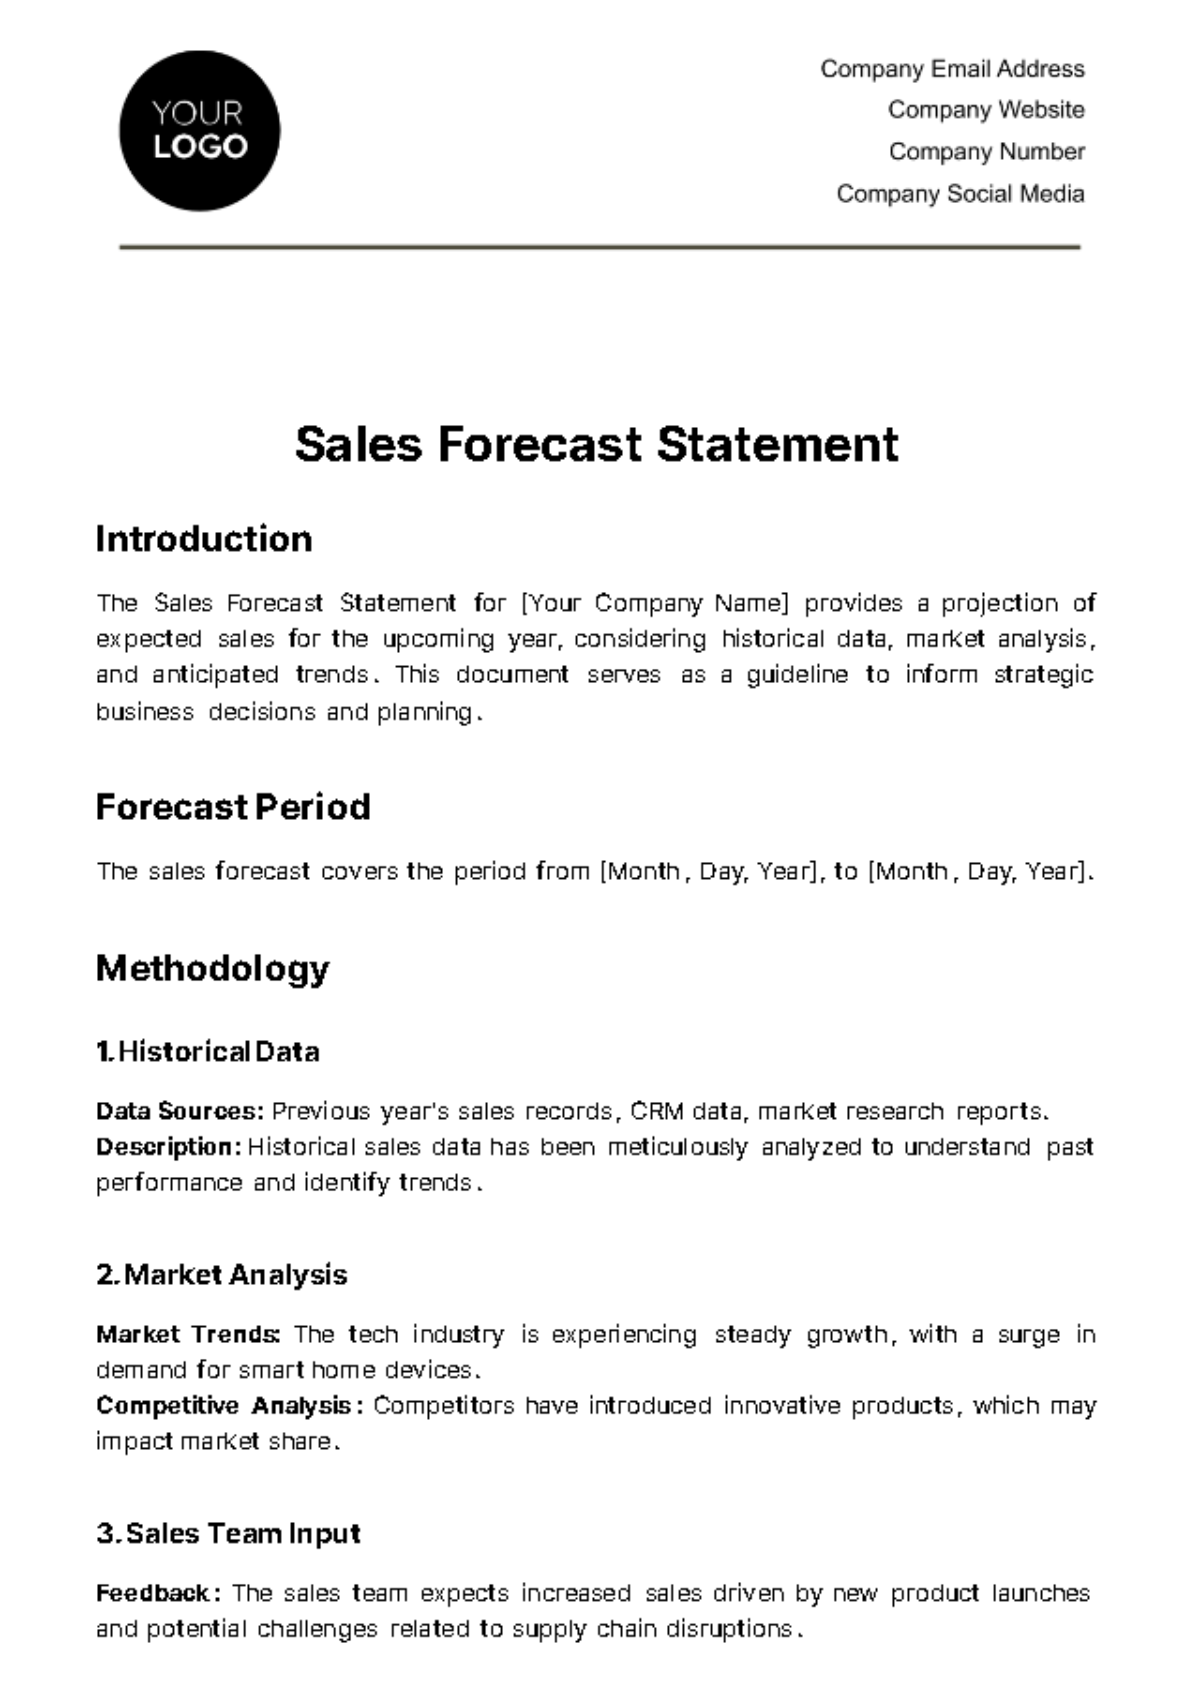 Sales Forecast Statement Template